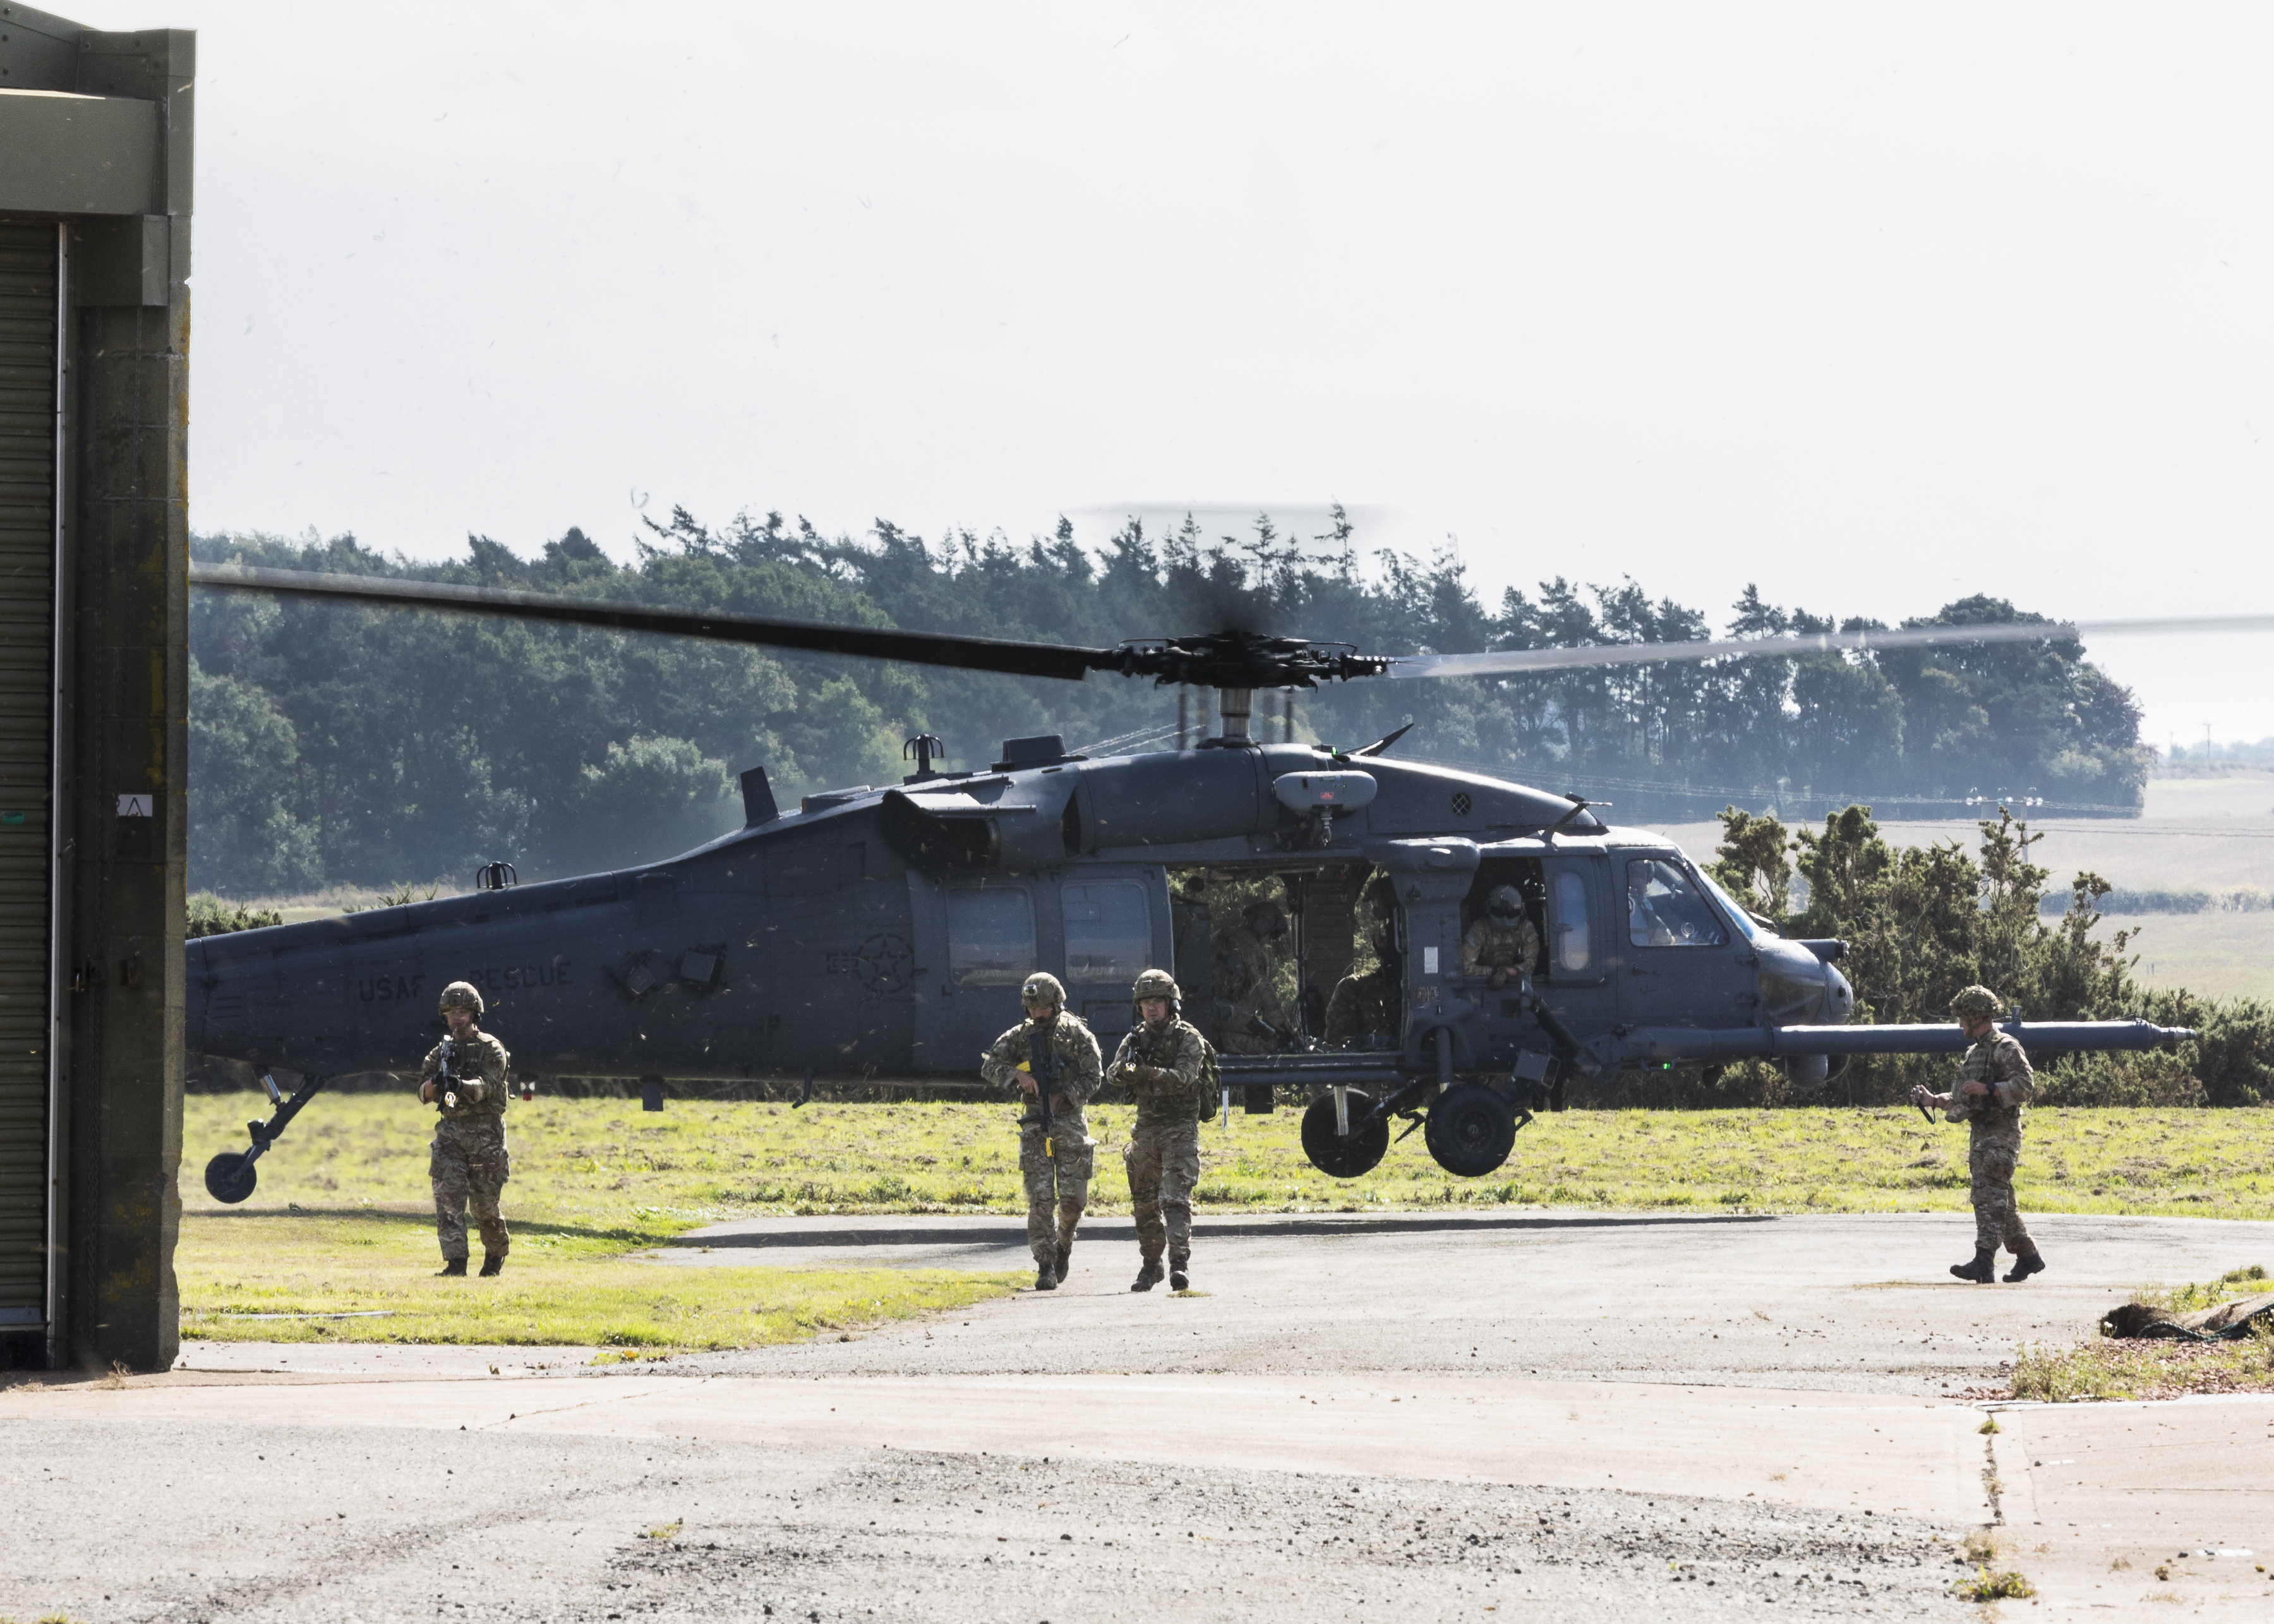 Image shows RAF personnel walling with rifles, with helicopter behind.